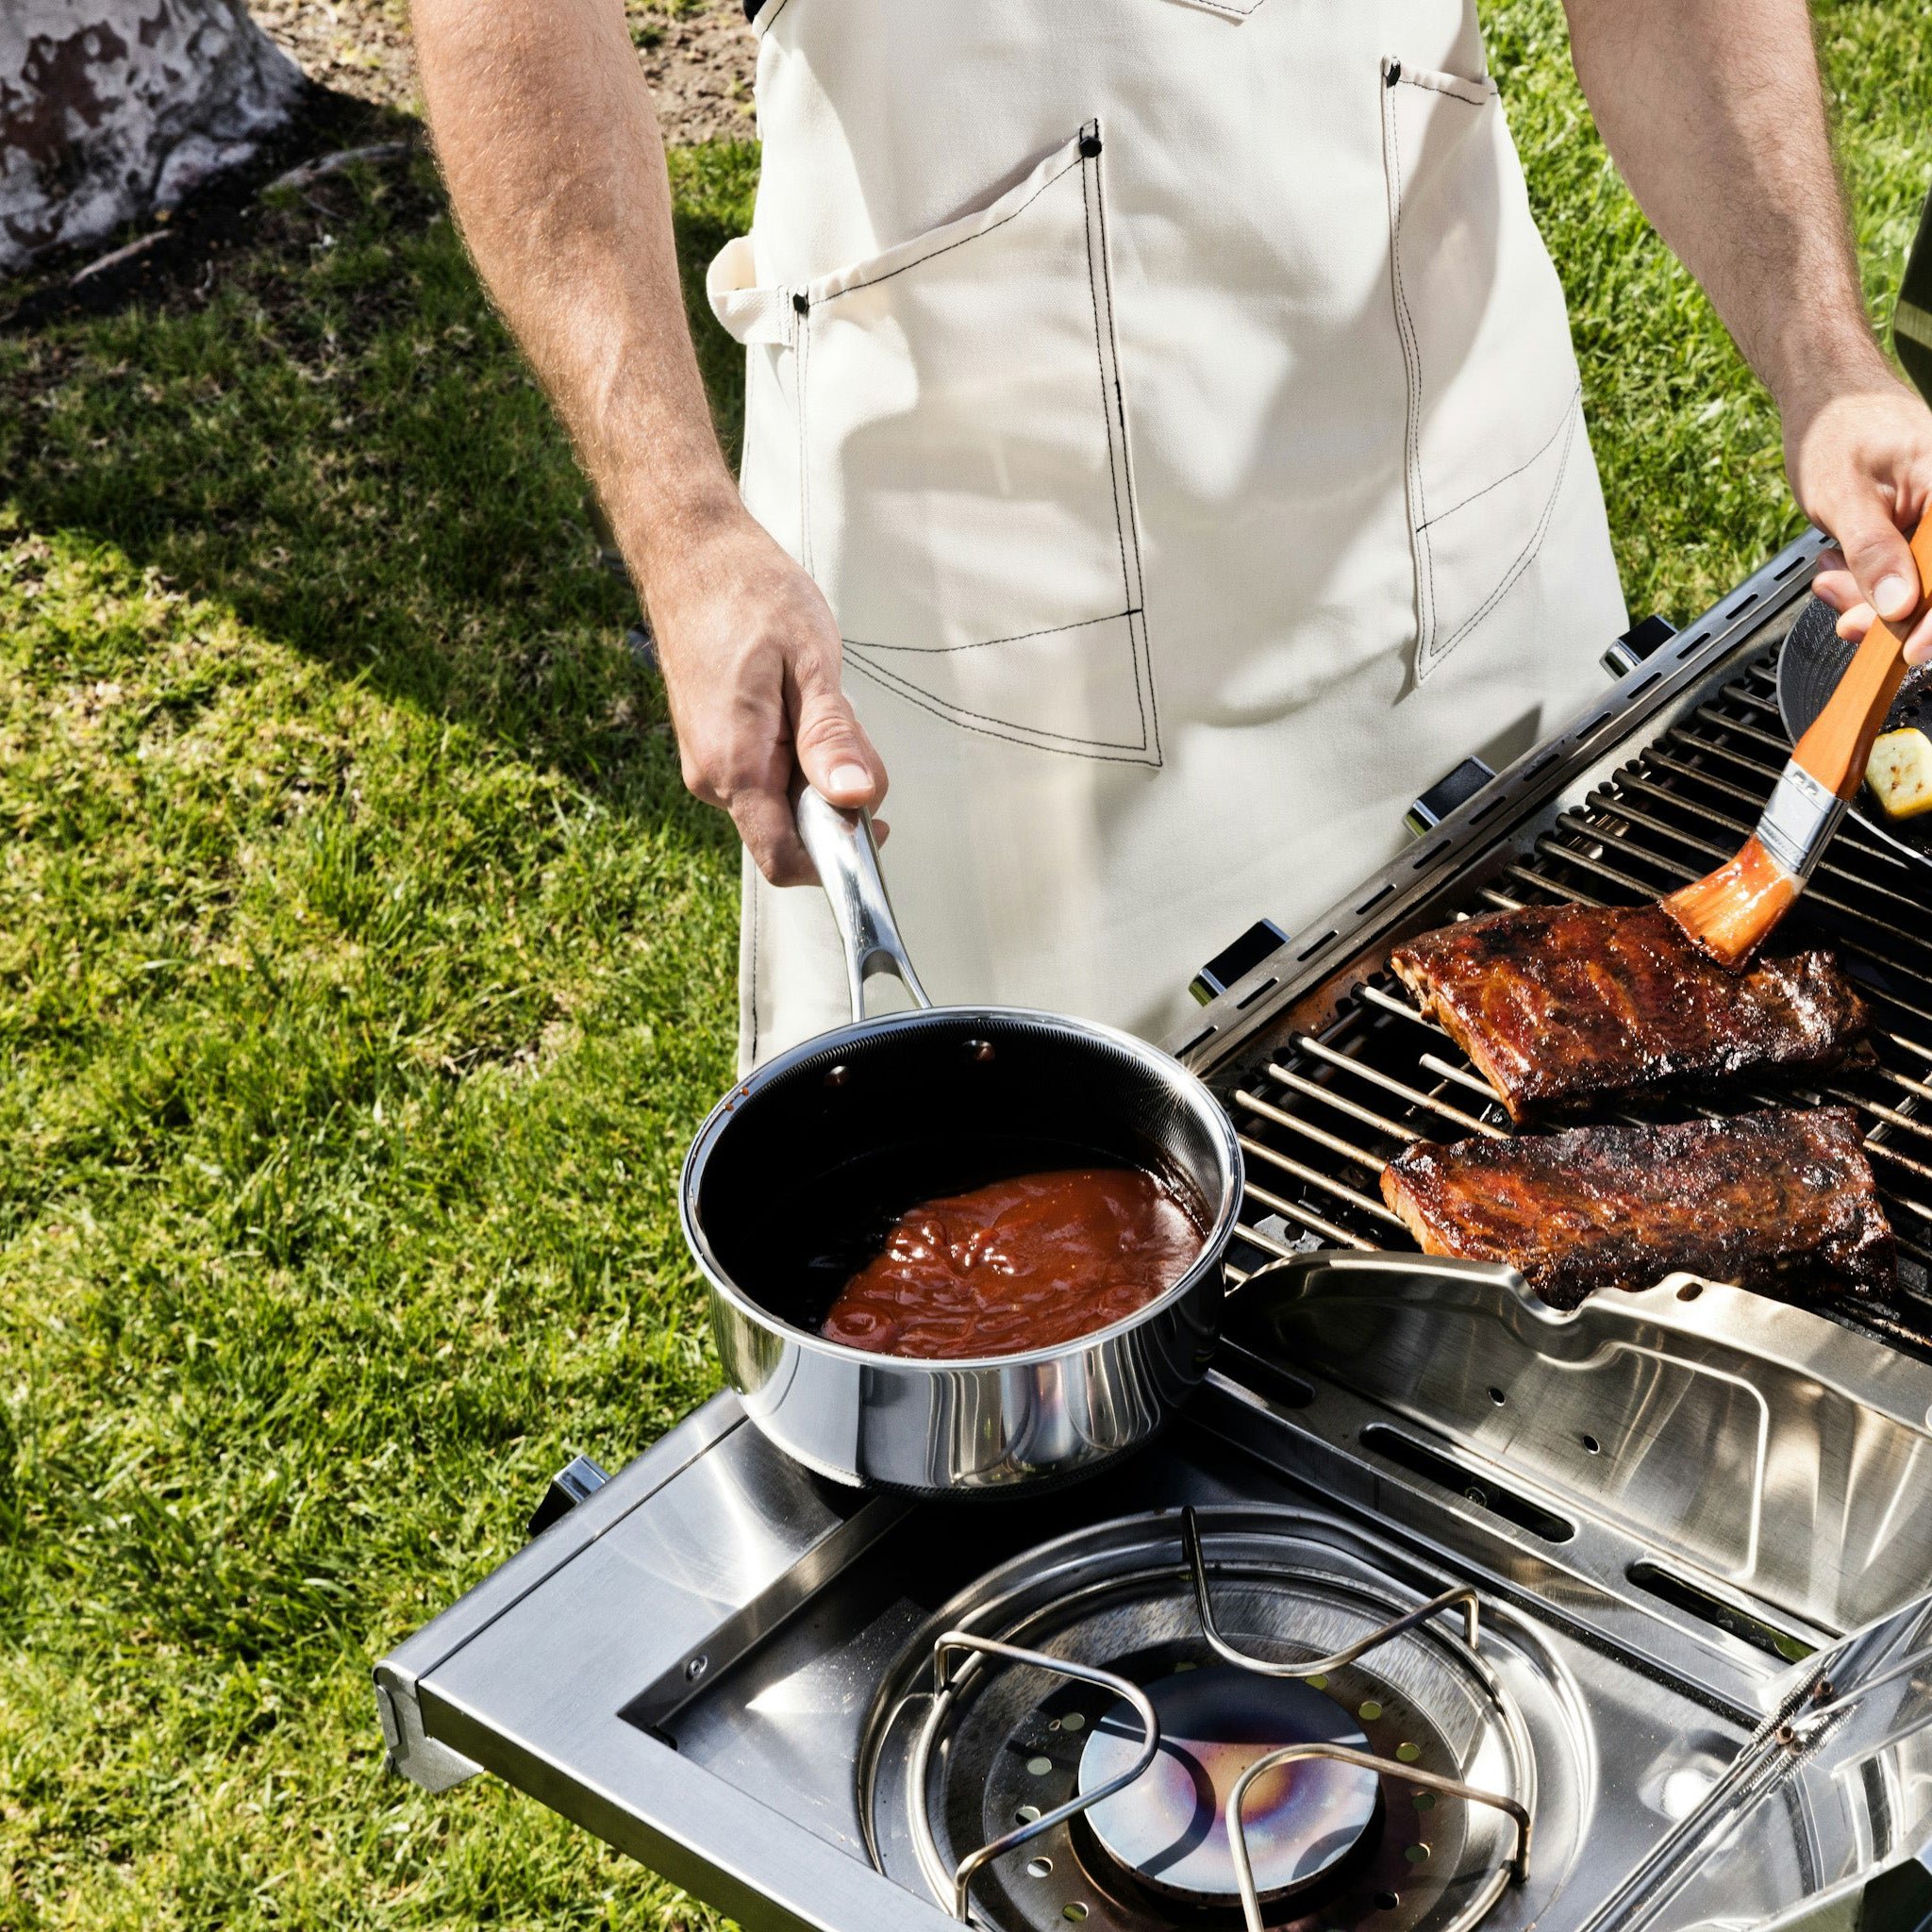 Person grilling ribs and basting with sauce in a yard.